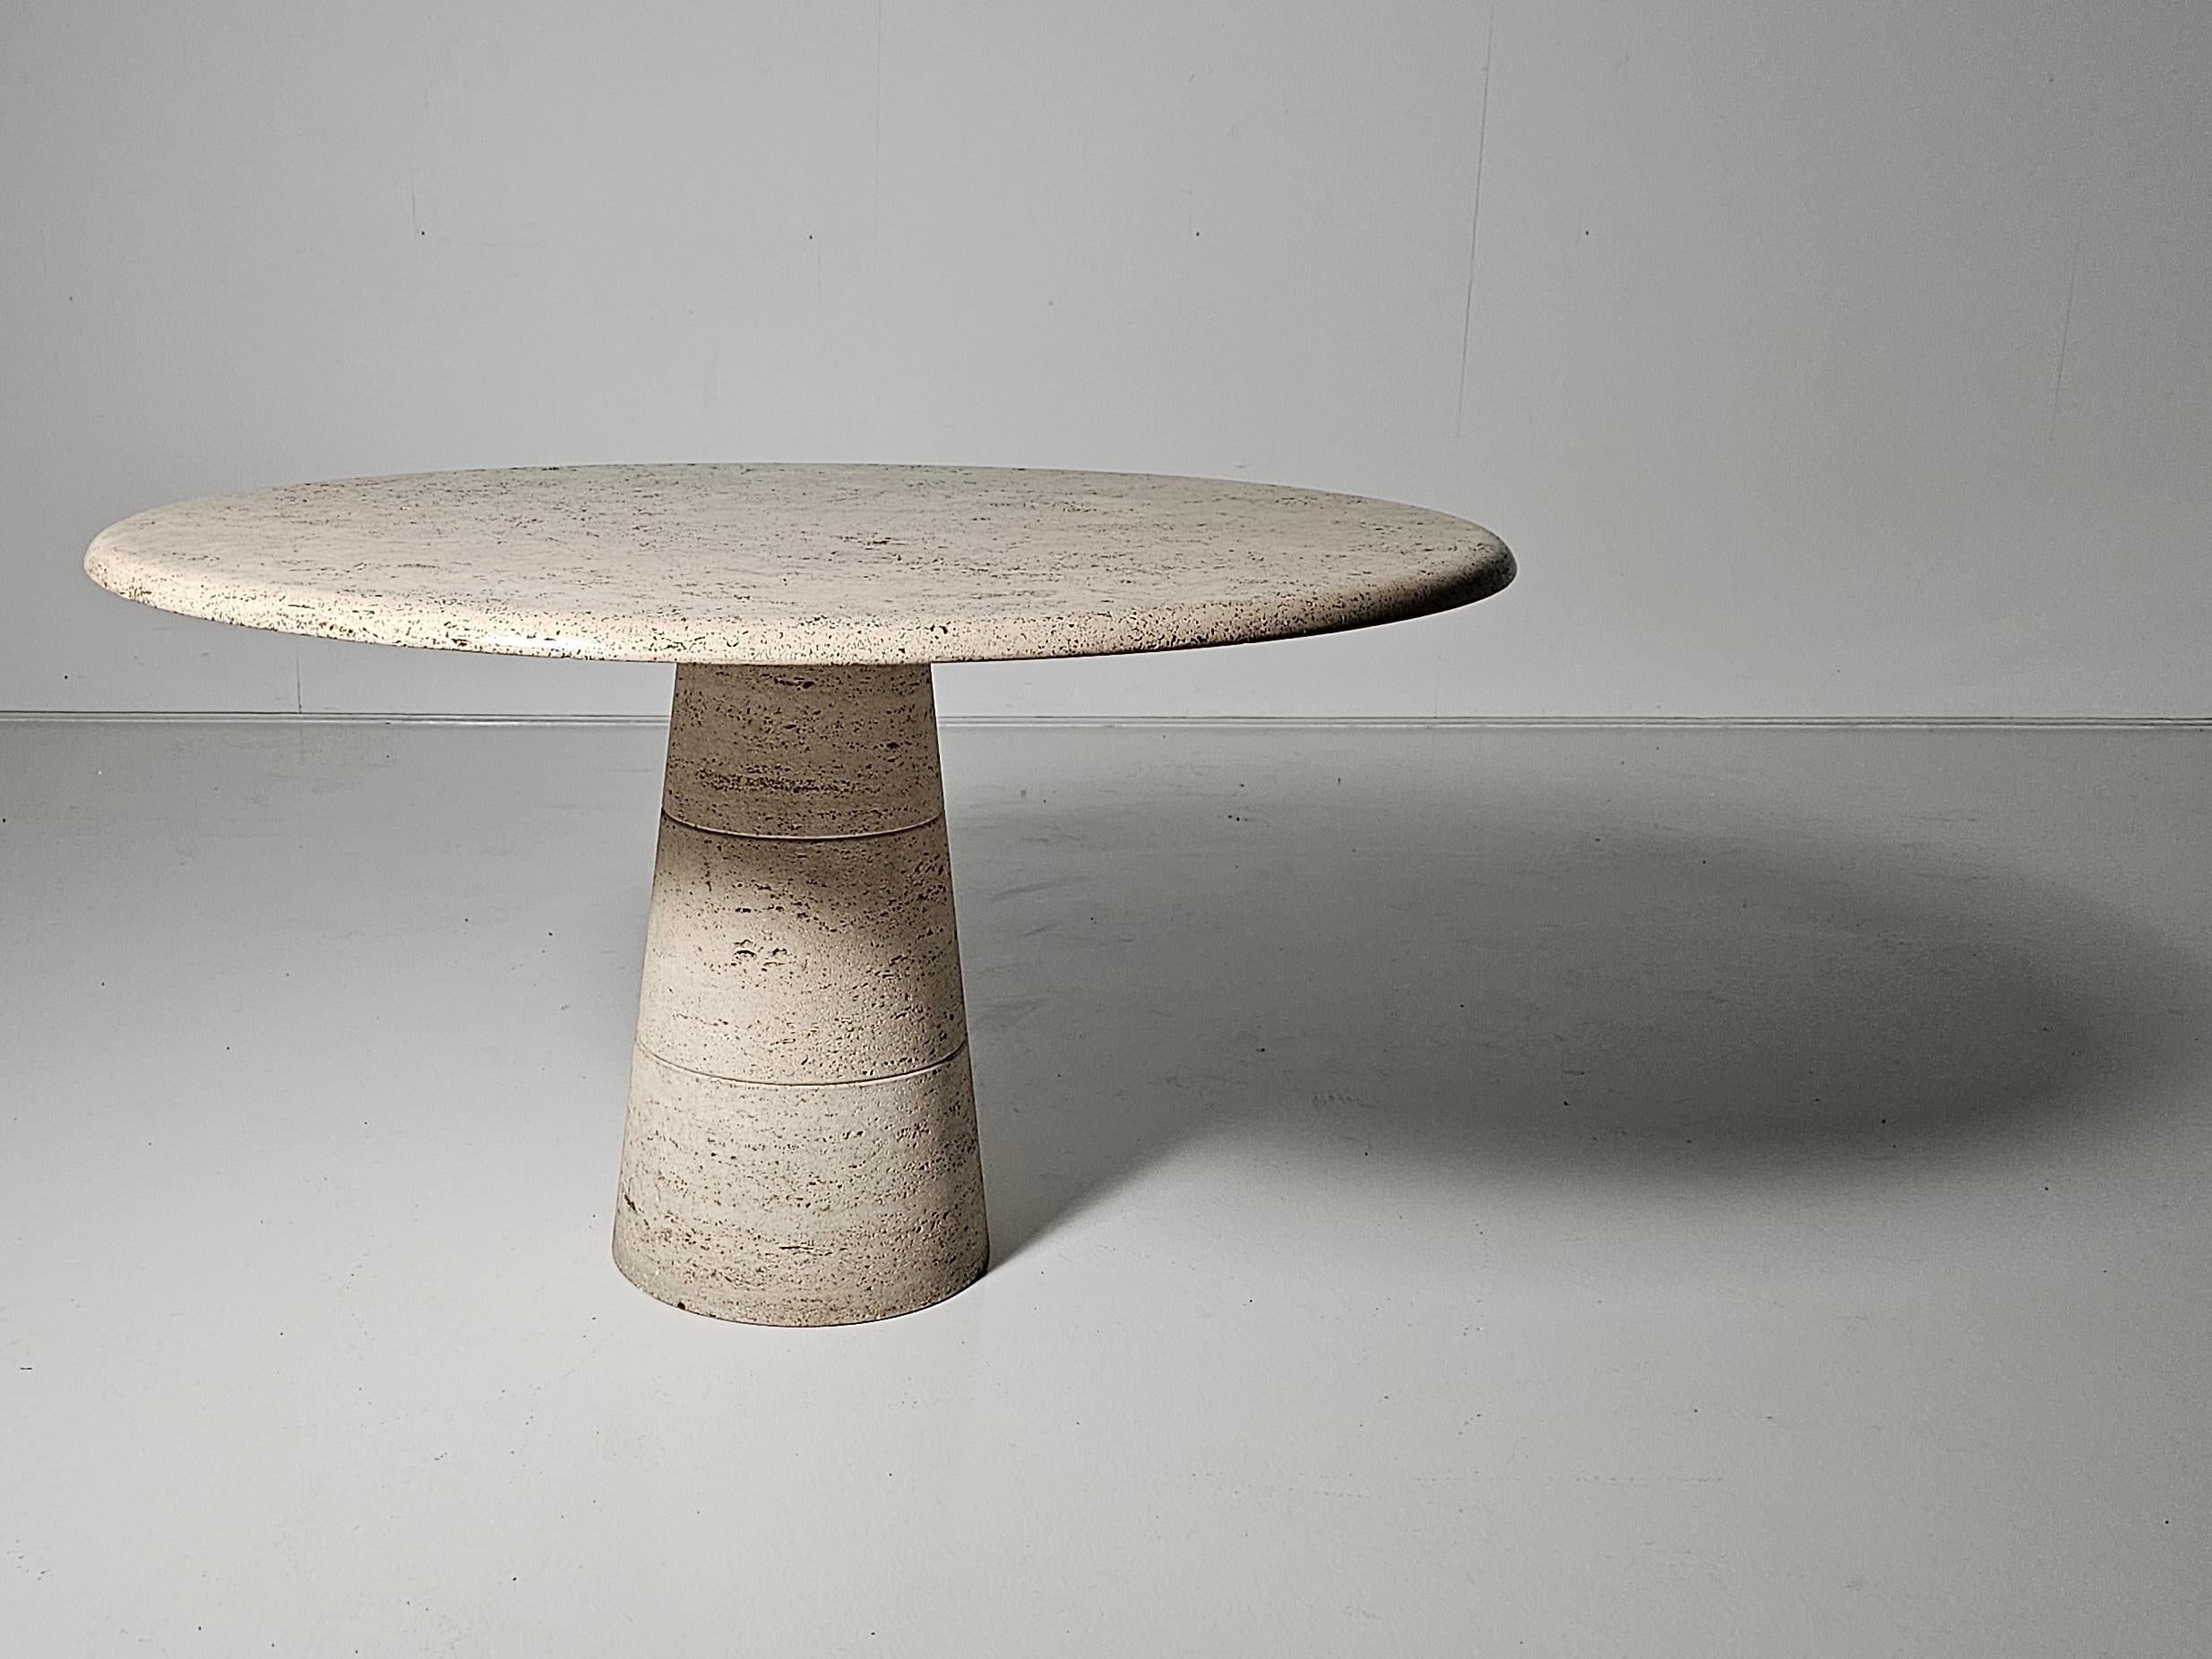 High-quality Italian round travertine marble table by Up & Up Italy.

Thick travertine top in variegated tones of grey, beige, and brown. The top rests on a round pedestal base also made of travertine. The top balances perfectly and securely on the